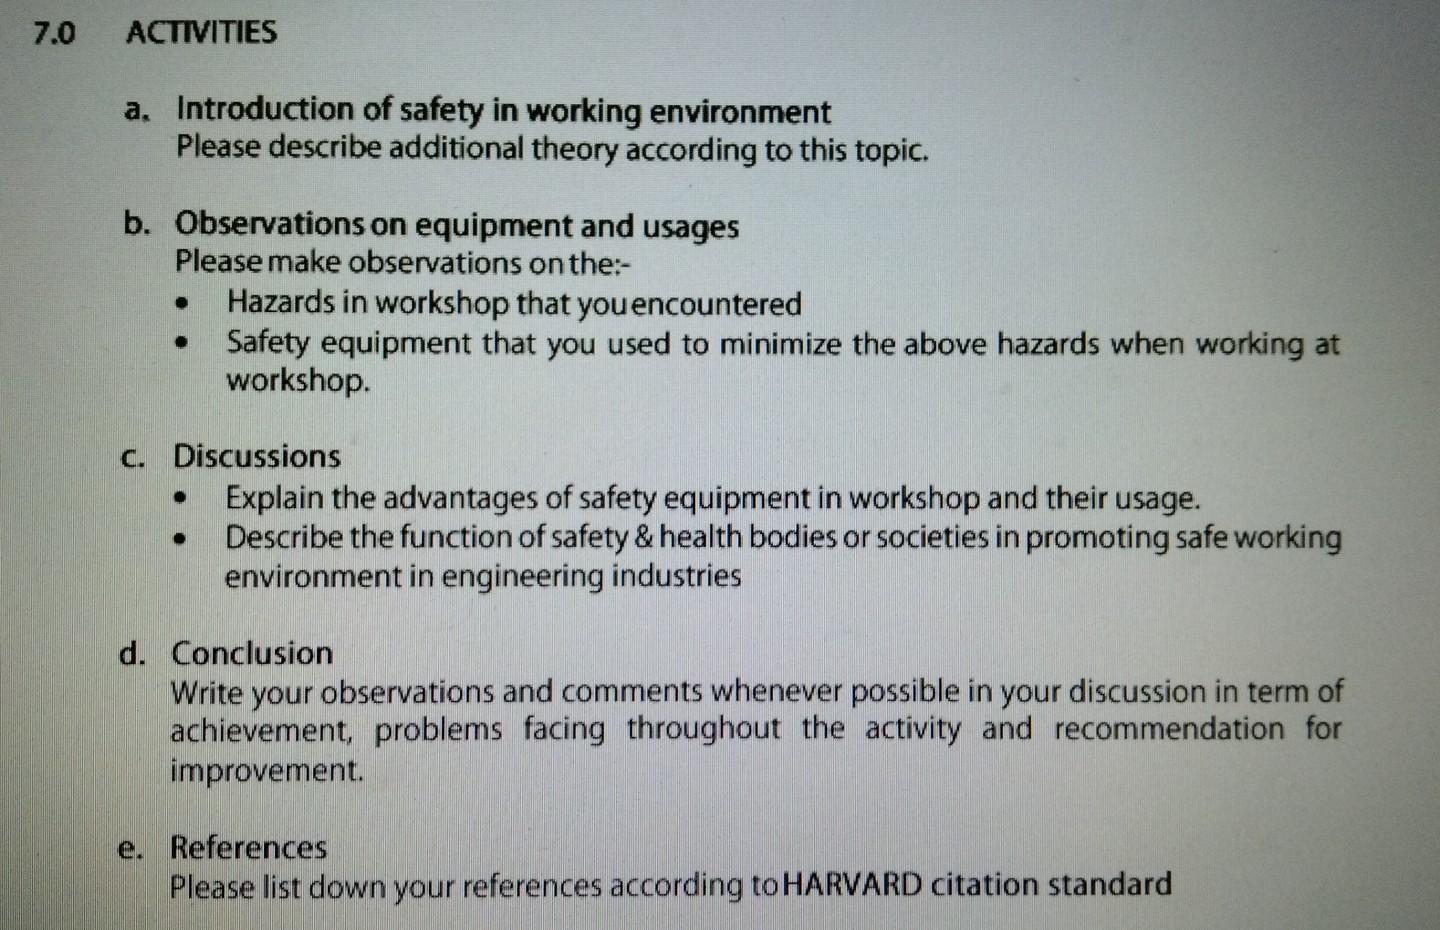 Importance of Wearing Safety Garments In Industrial Environments